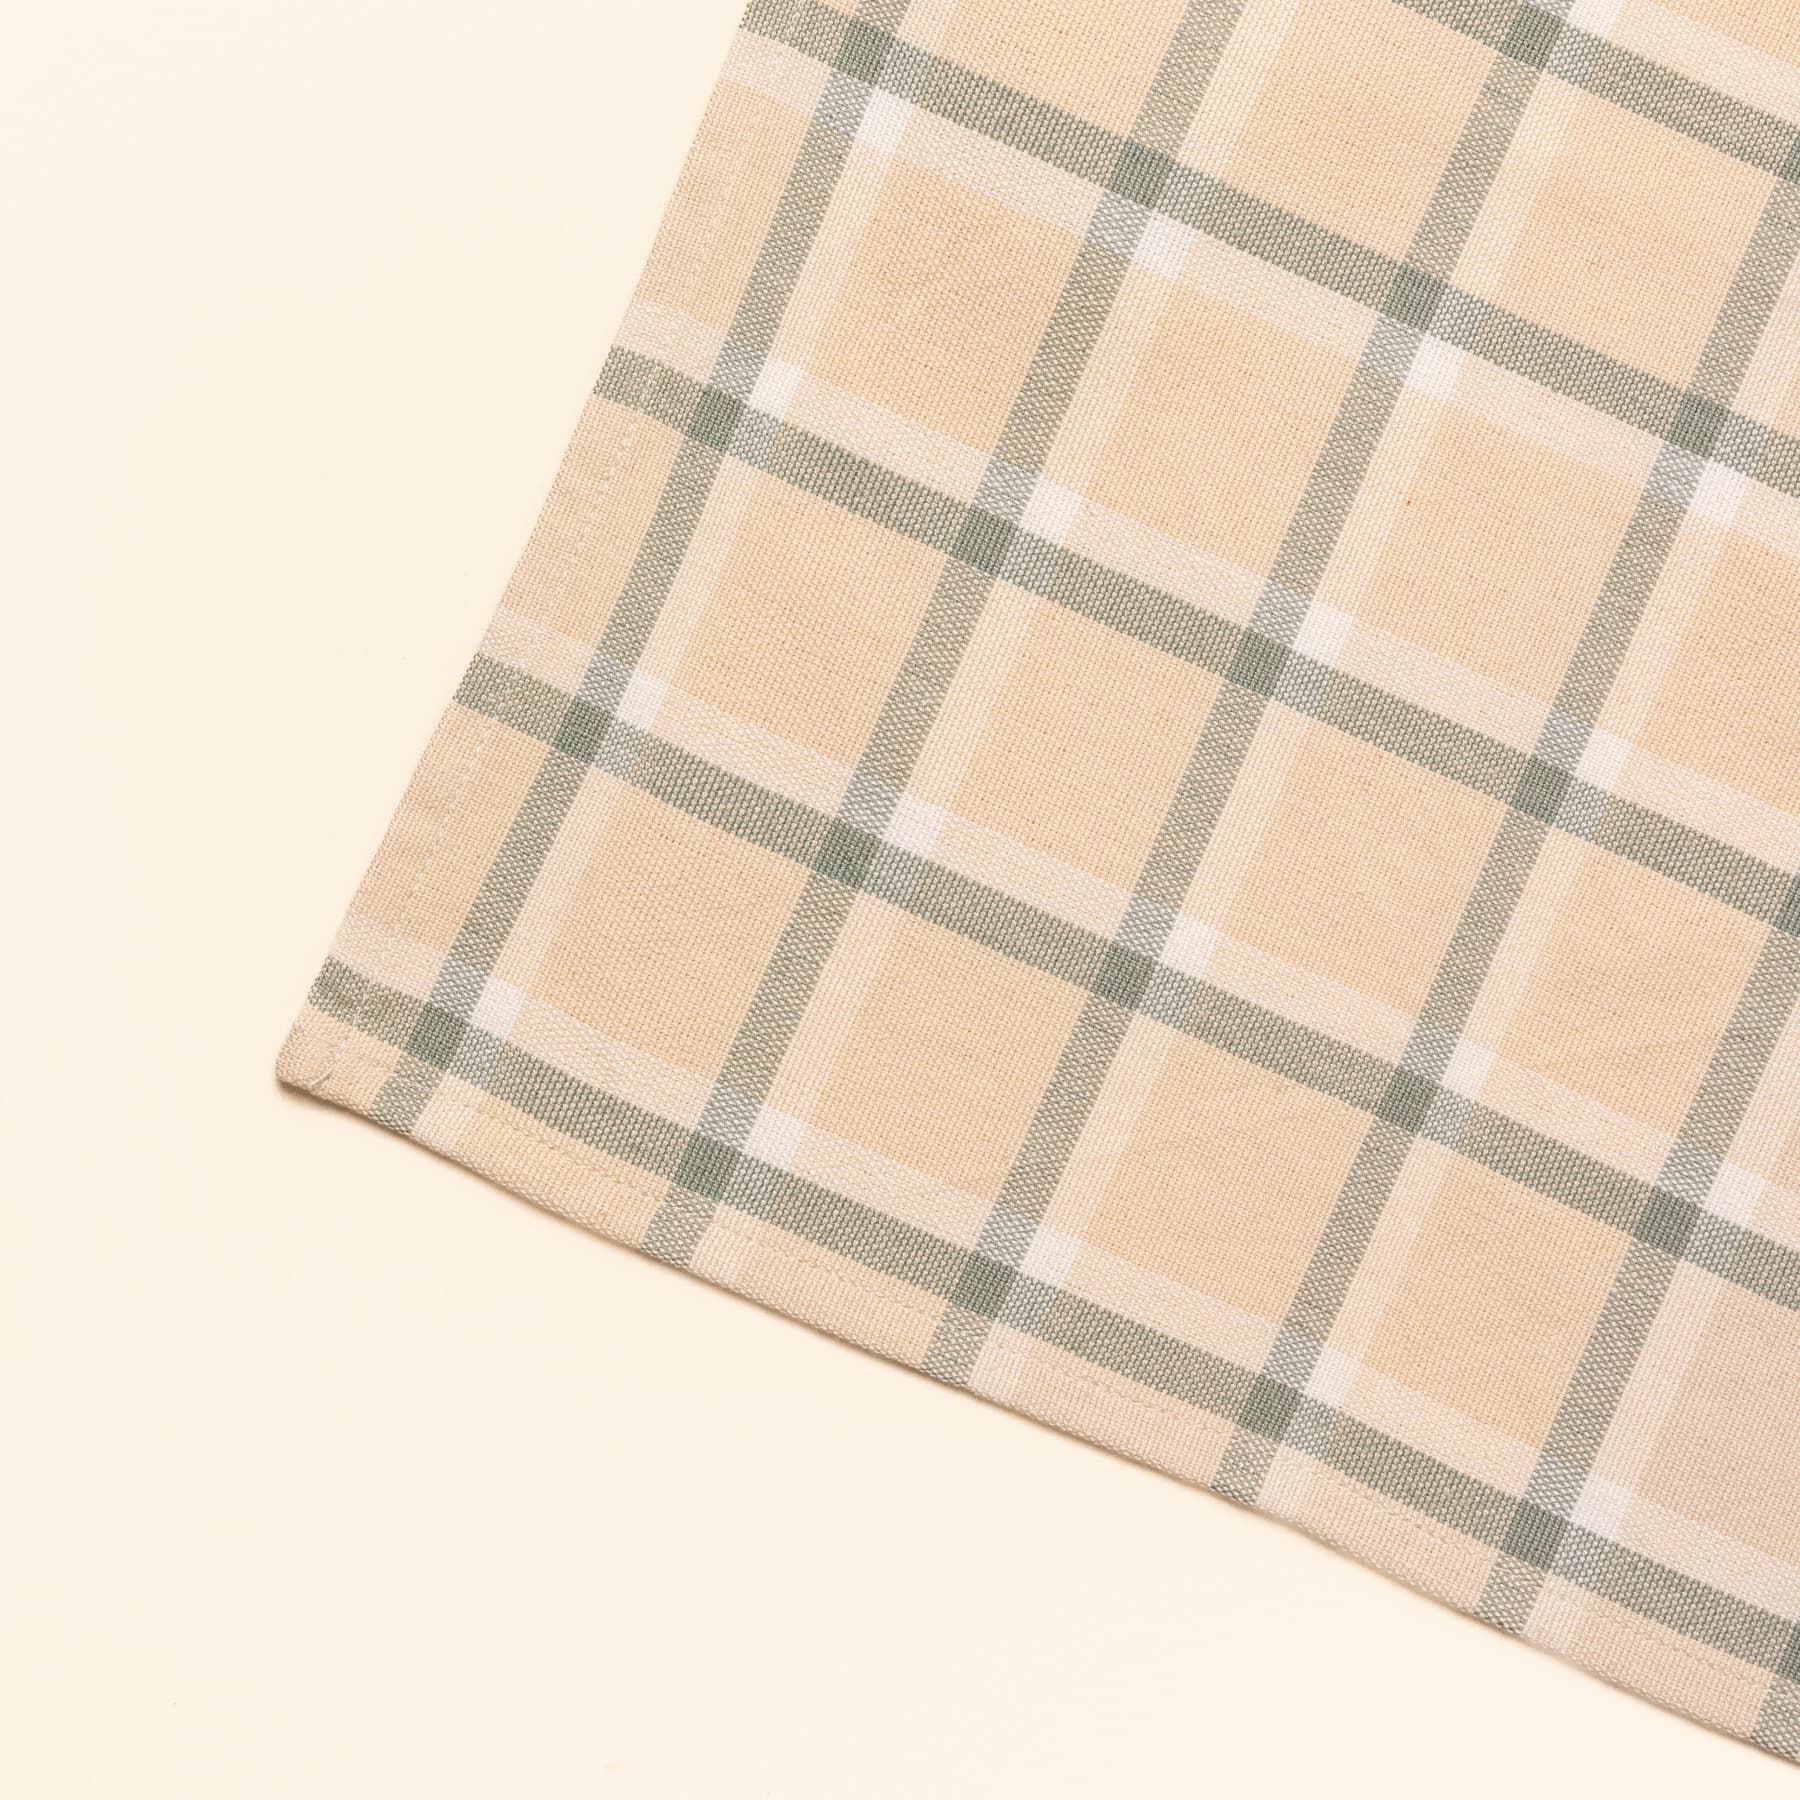 A close up of a corner of a gingham rectangular placemat in cream, off-white, and sage green colors